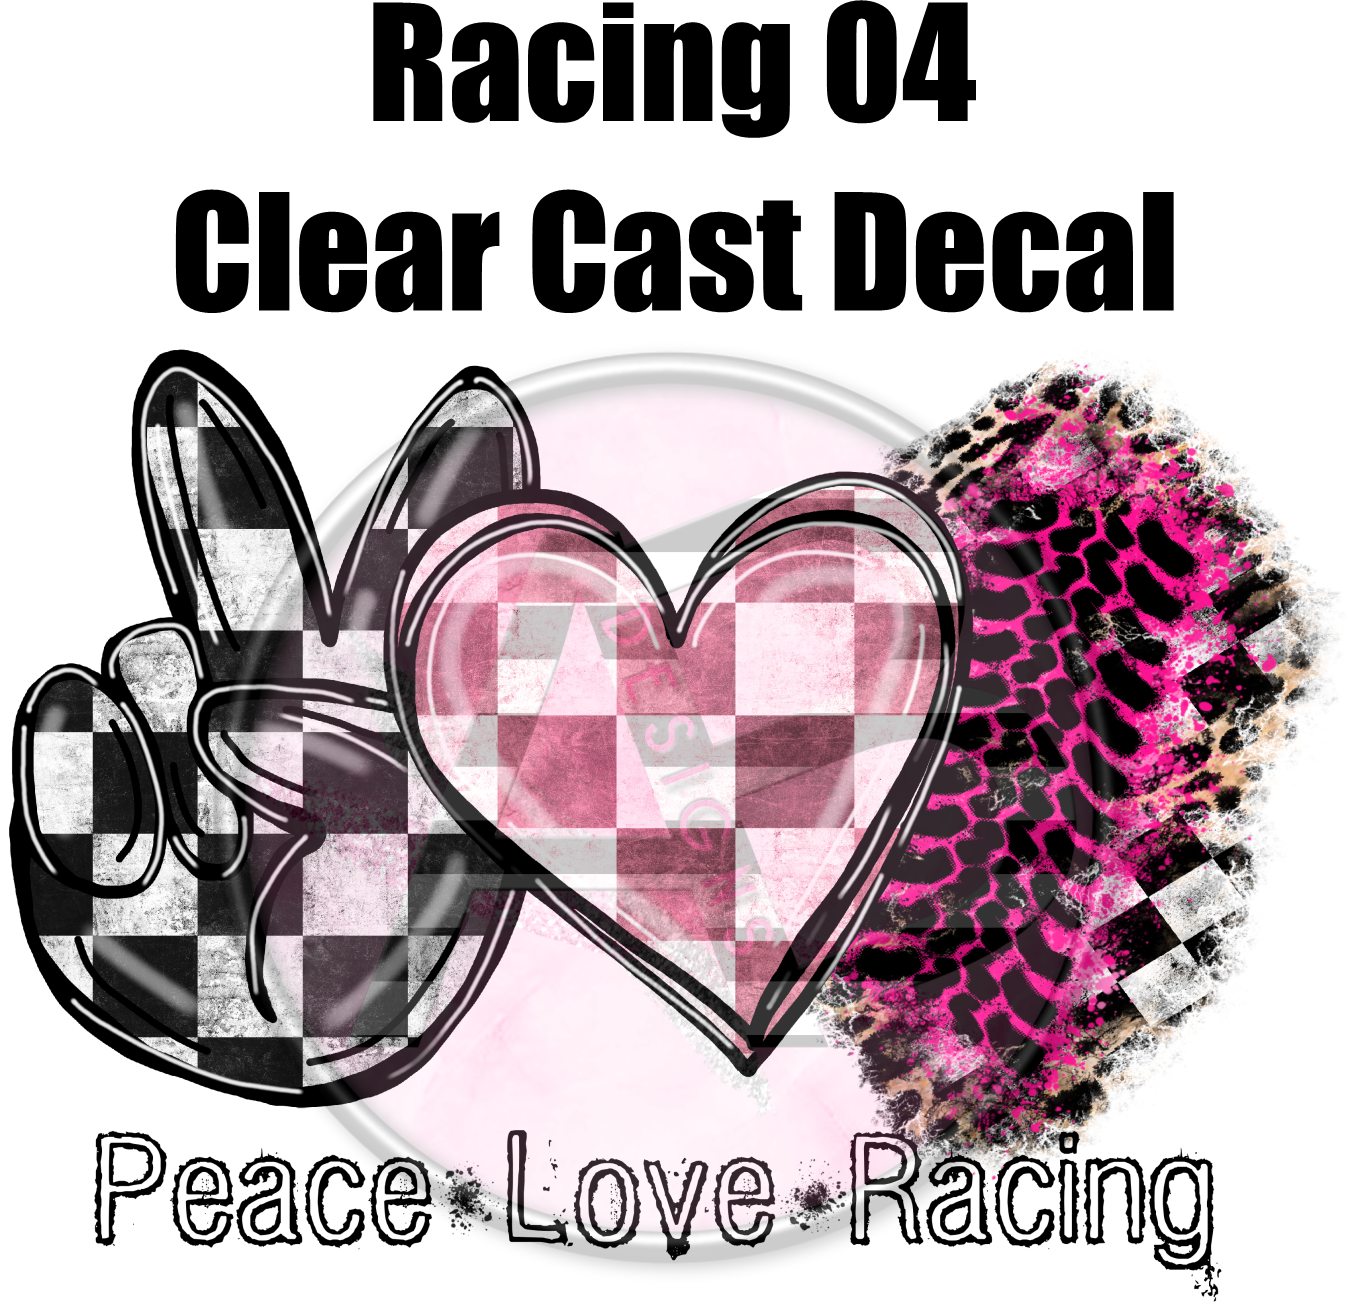 Racing 04 - Clear Cast Decal